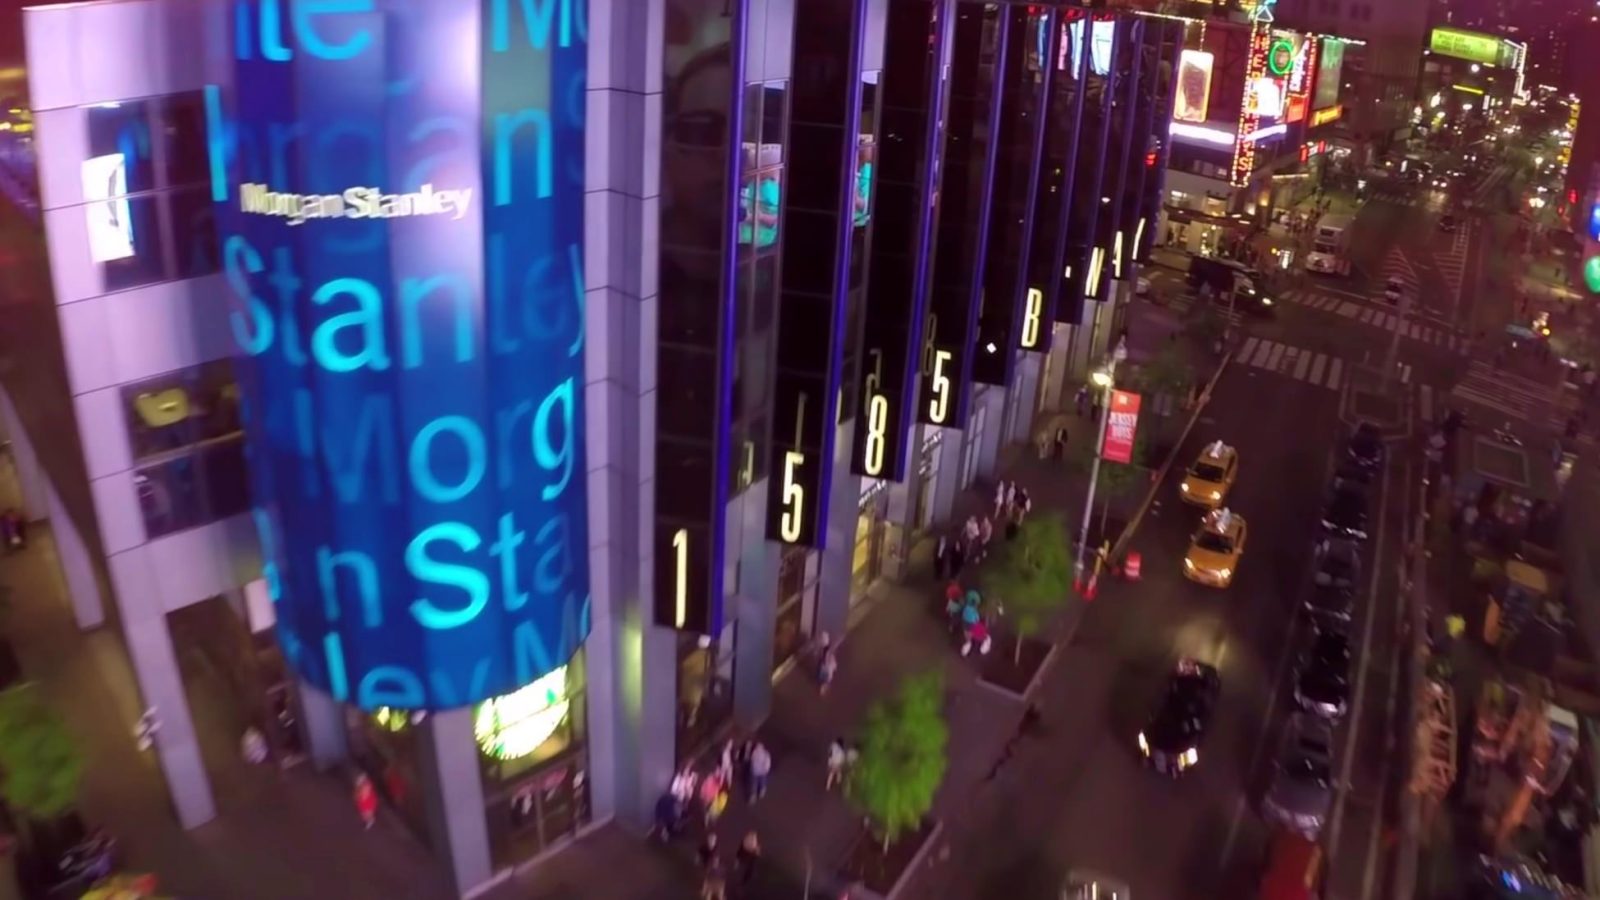 Fly your drone in NYC? Best to watch this video first!